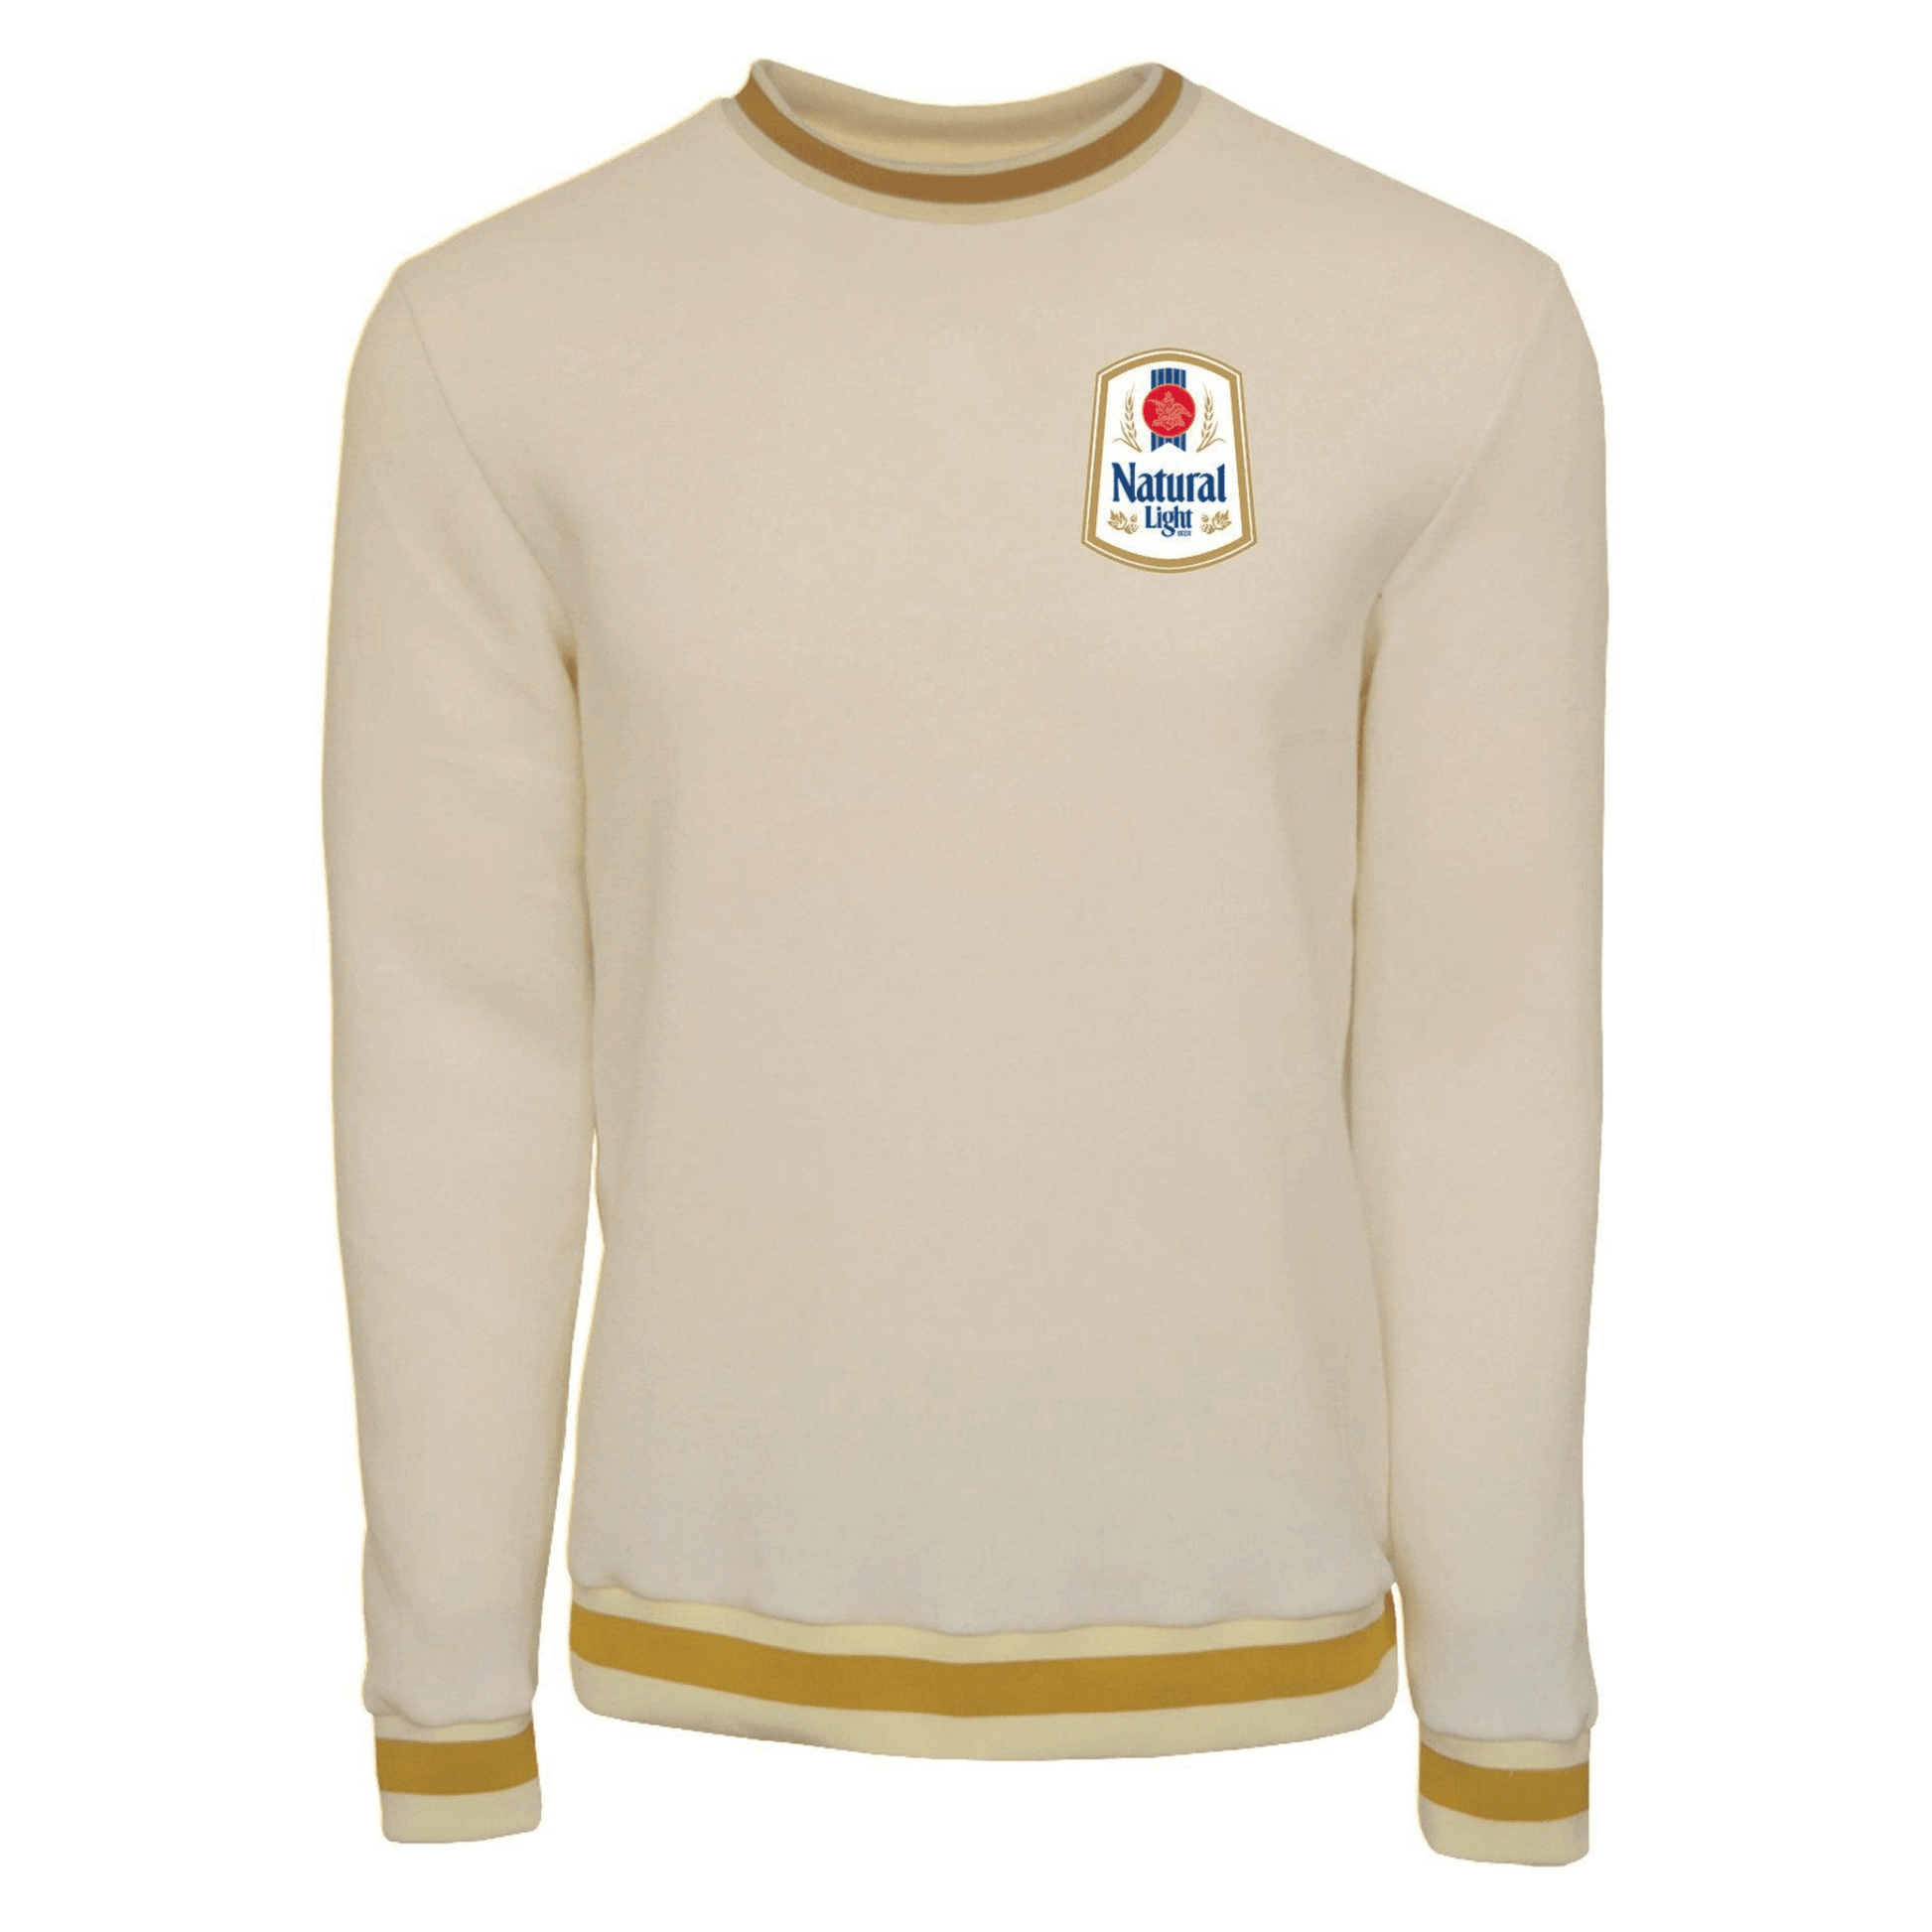 Gold Sweatshirt with Vintage Natural Light logo patch on front left chest of sweatshirt.